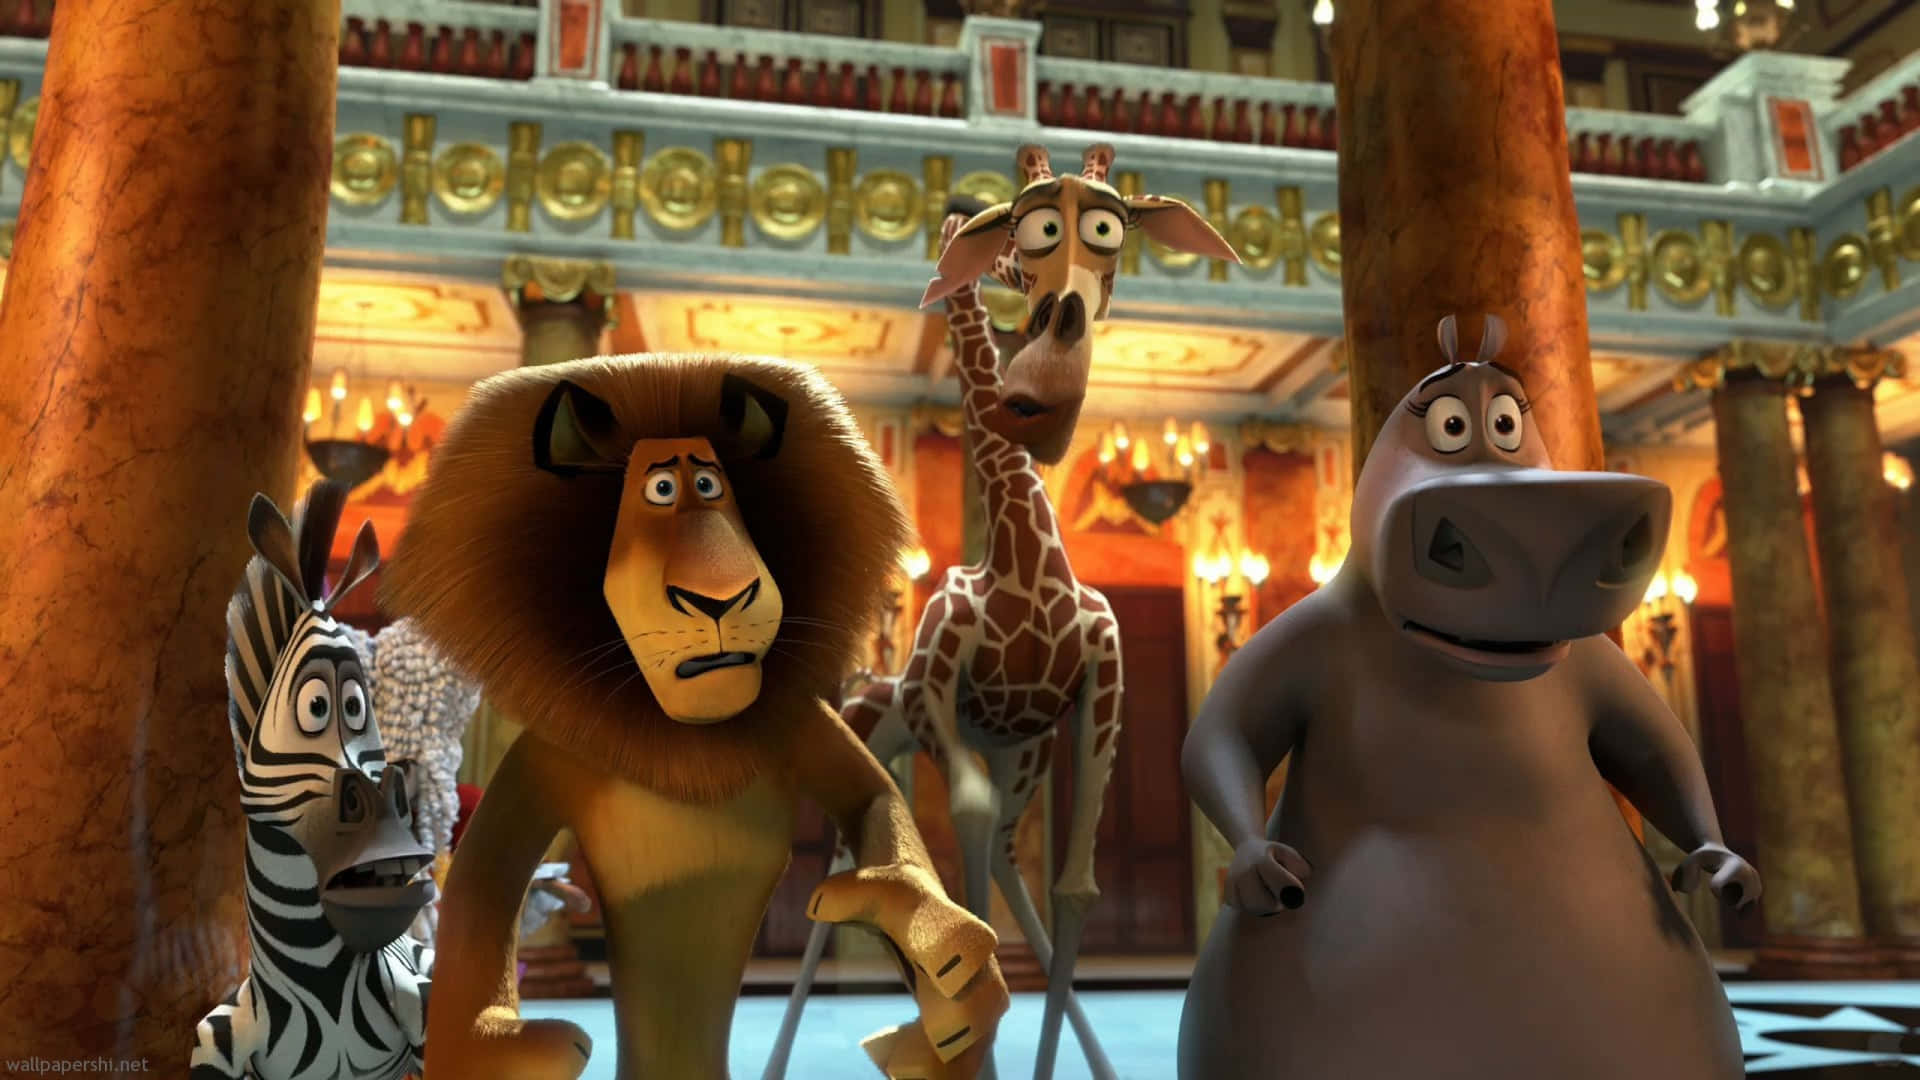 Madagascar3 Characters In Circus Lobby Wallpaper